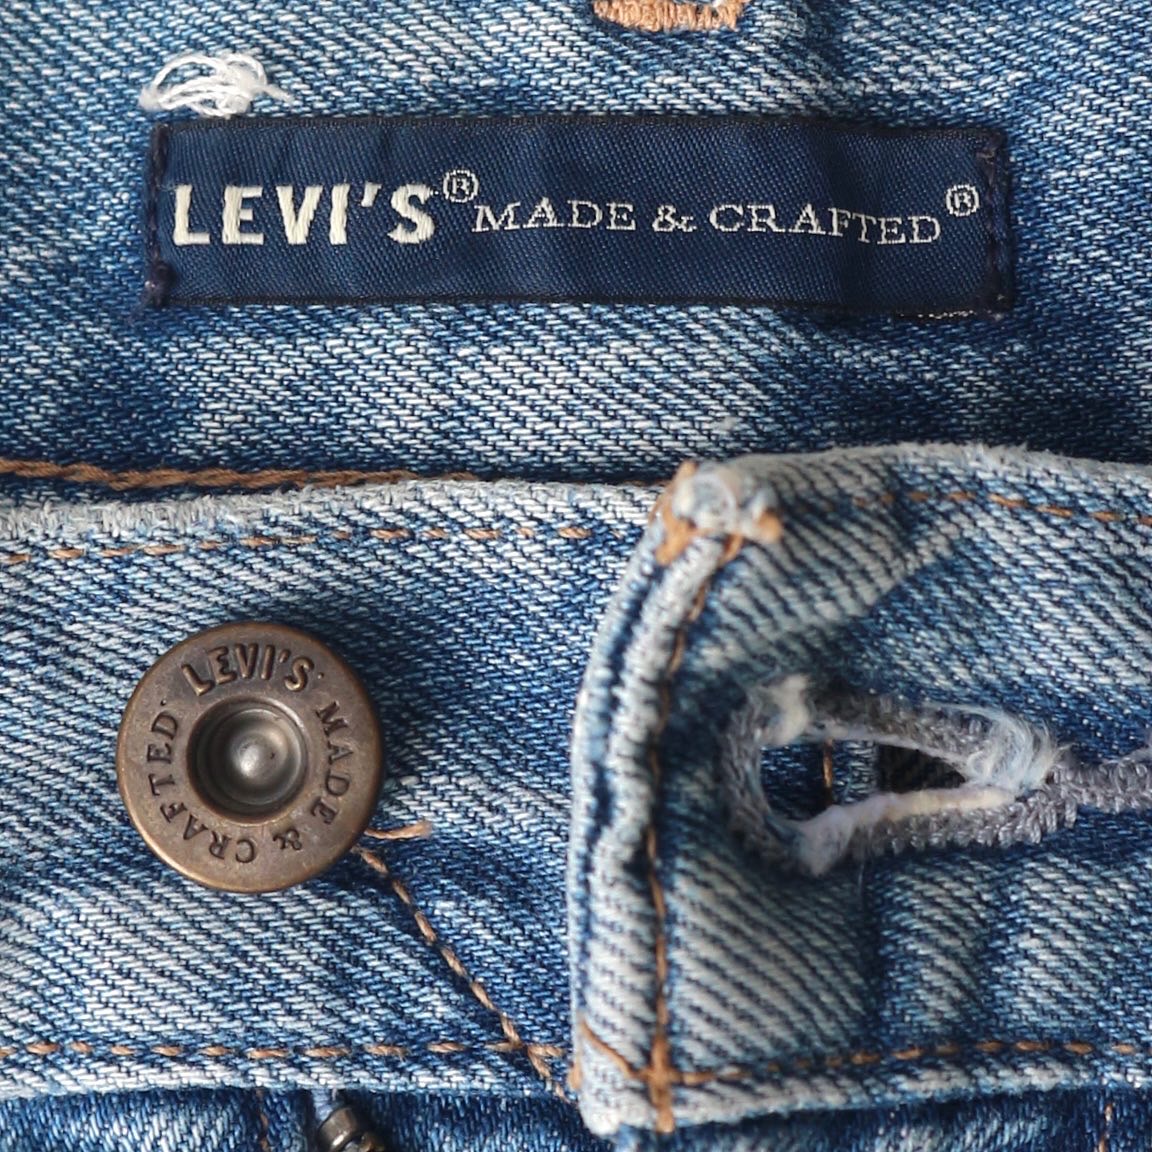 LEVI'S MADE & CRAFTED Size 25 denimister